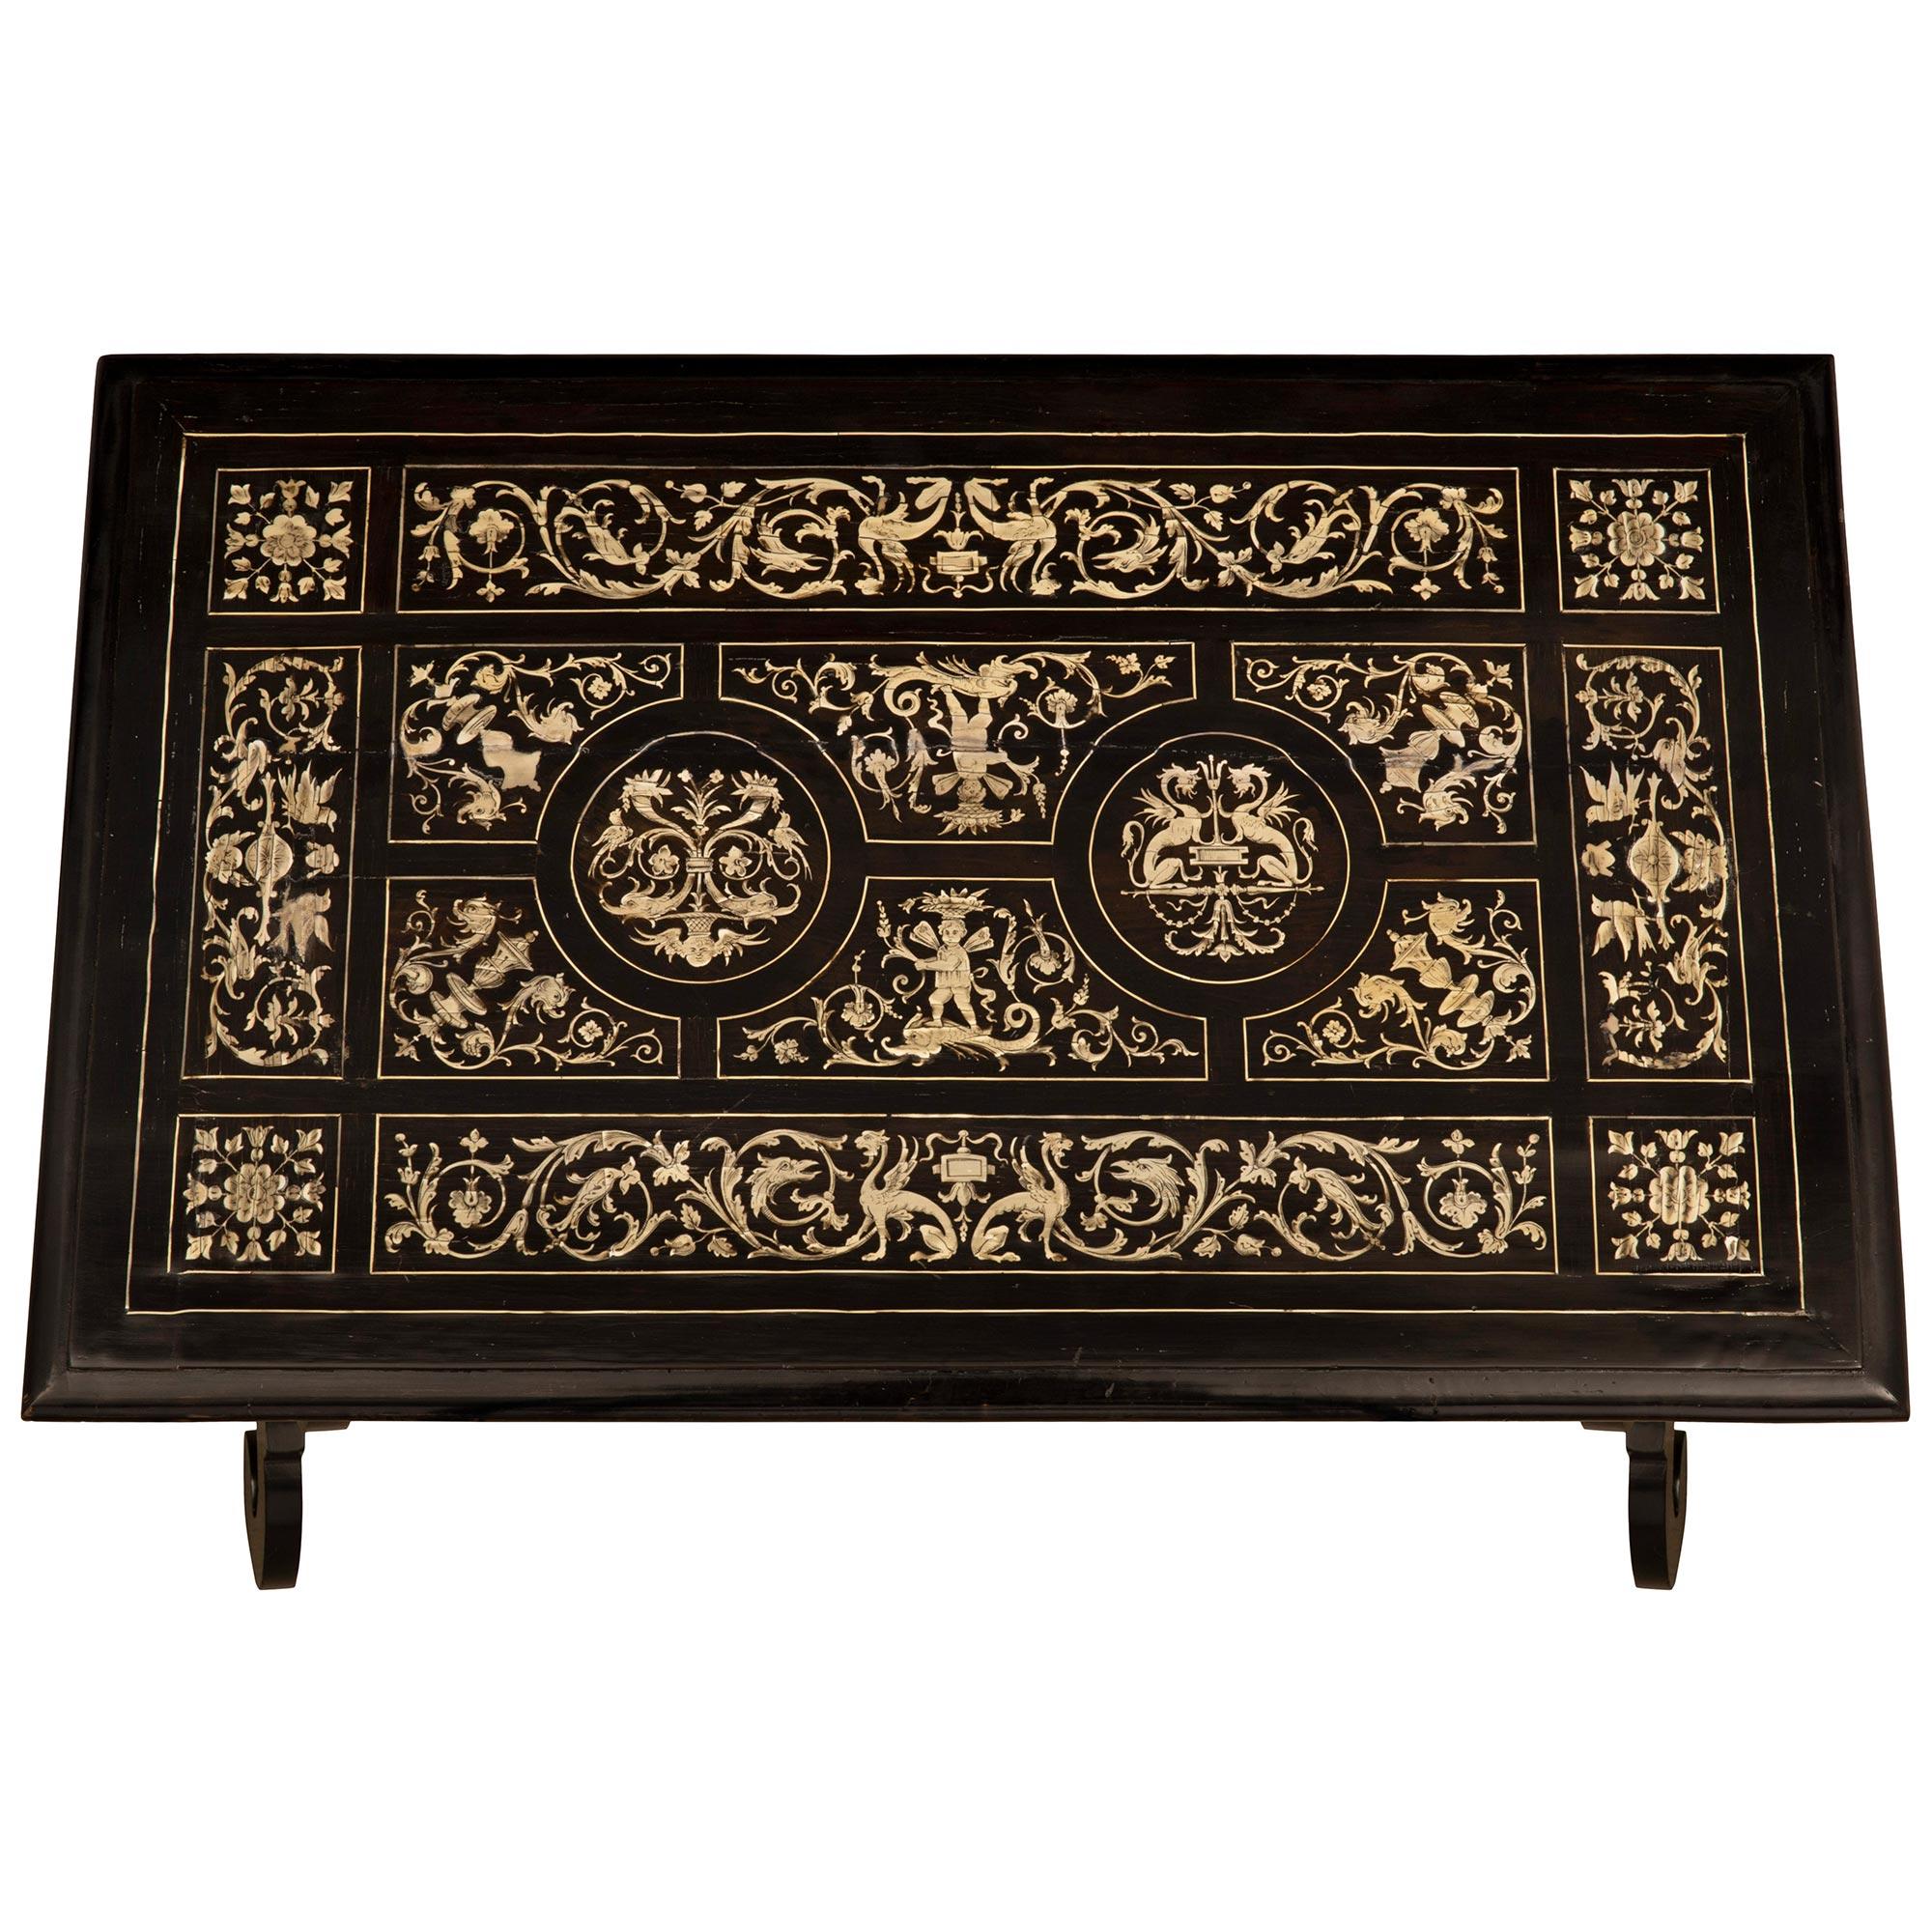 An exceptional Italian 19th century Ebony and bone side table from Northern Italy circa 1870. The table is raised by beautiful most unique scalloped shaped supports with lovely scrolled designs decorated with fine bone inlaid fillets and connected